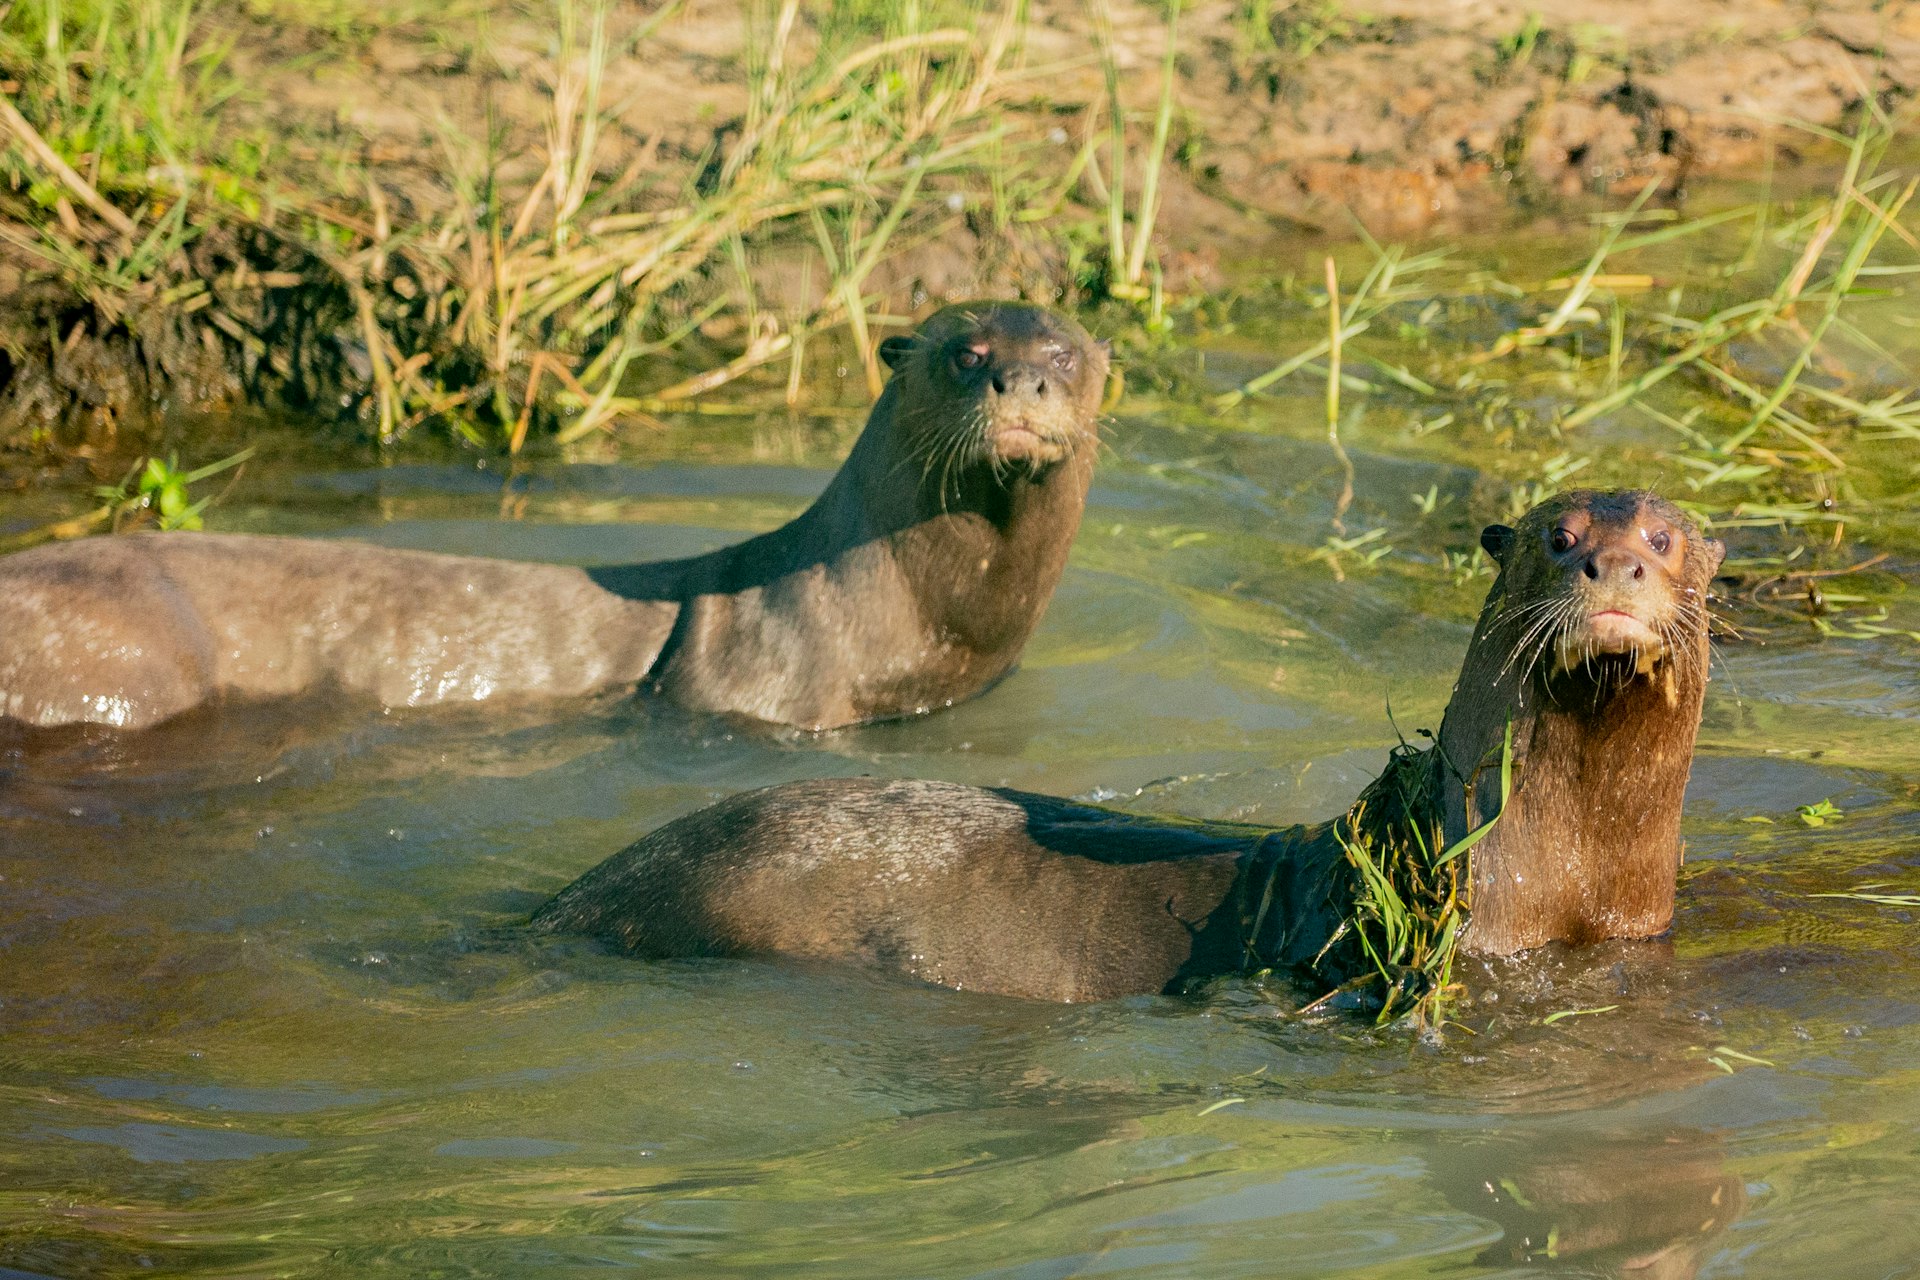 Two giant river otters in Argentina's Ibera wetlands